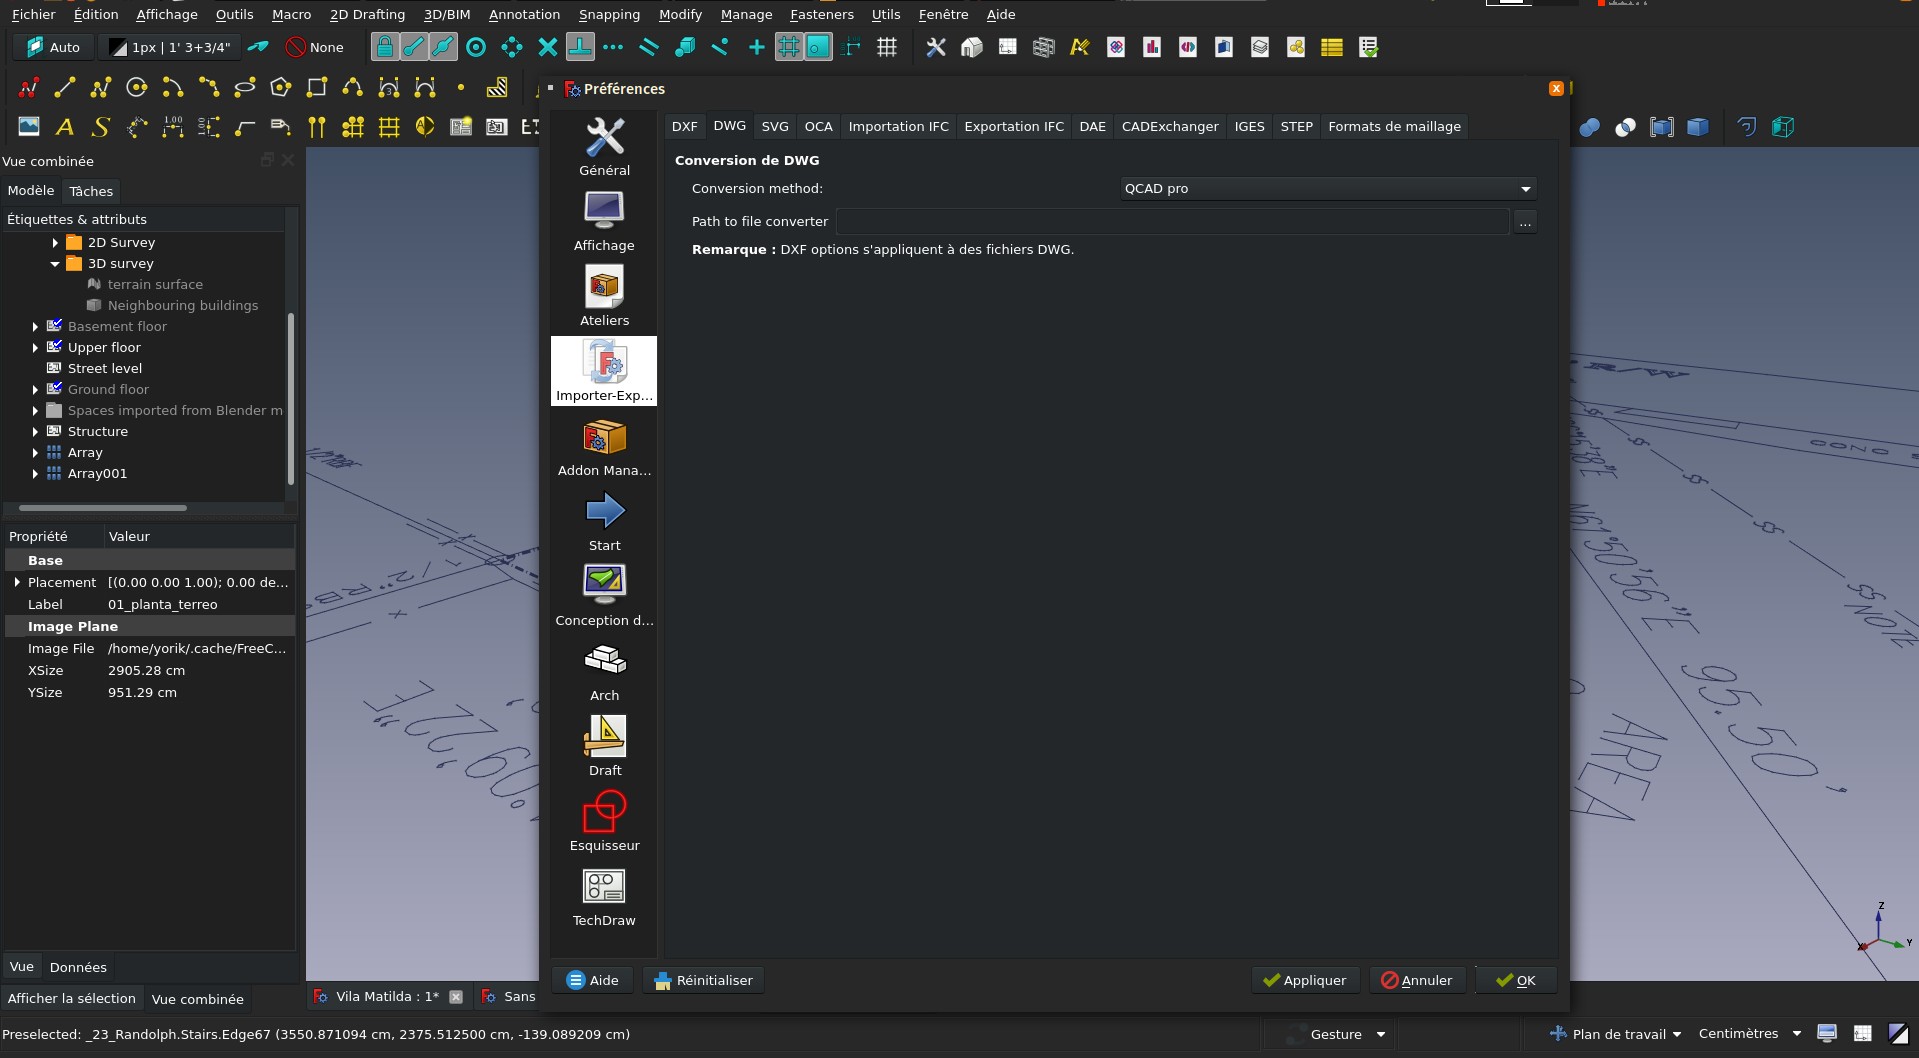 a screenshot of FreeCAD showing the DWG preferences screen